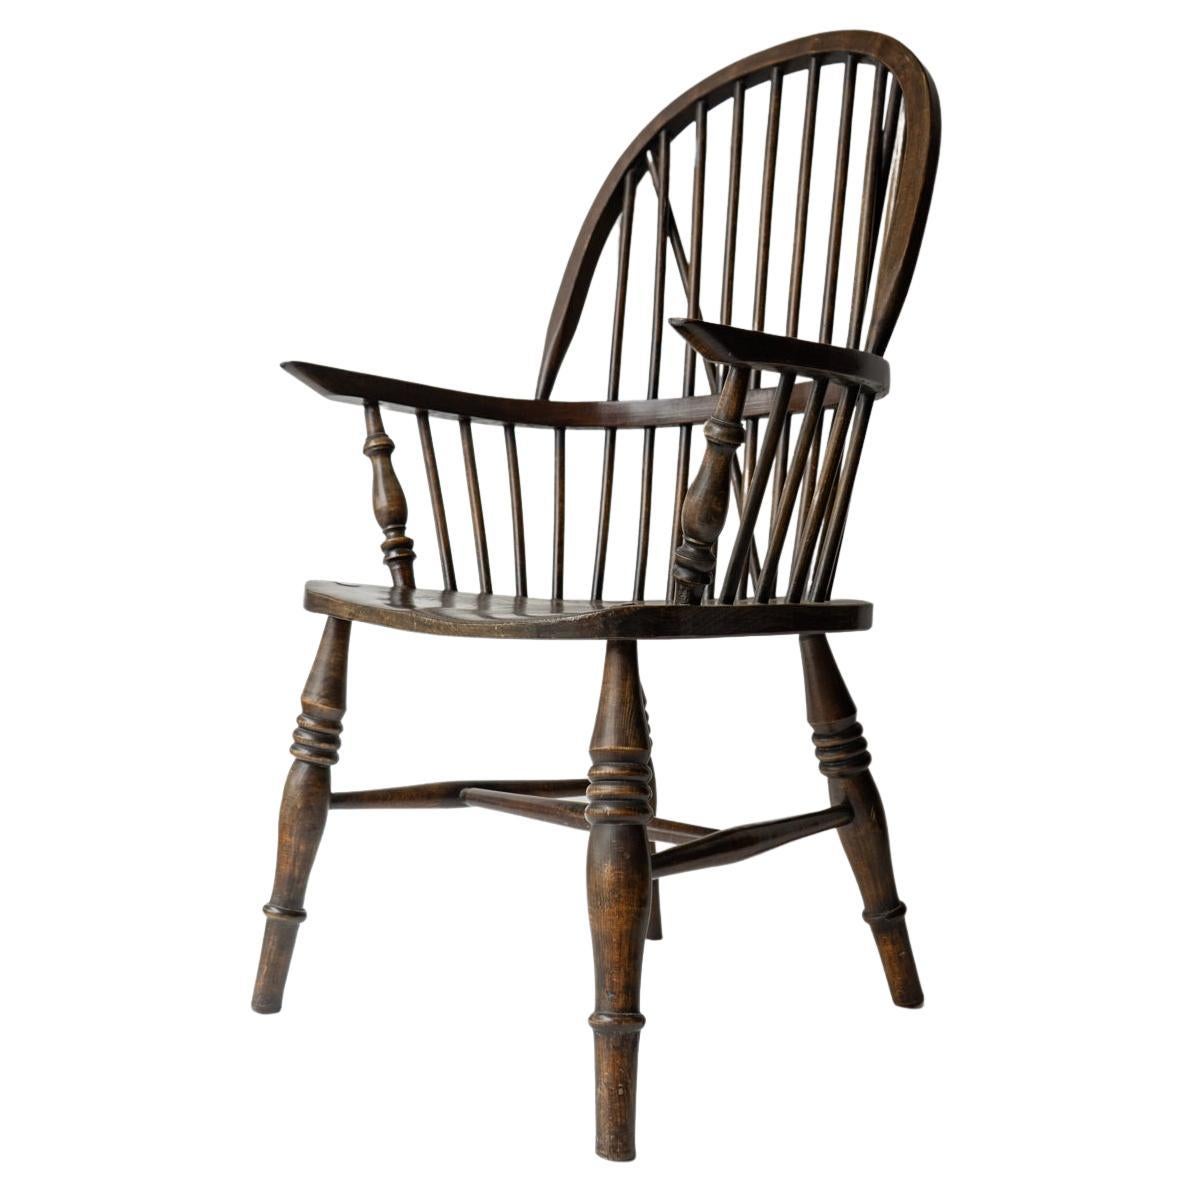 STICK BACK ASH & ELM WINDSOR CHAIR, Antique Rustic Country Made Carver armchair